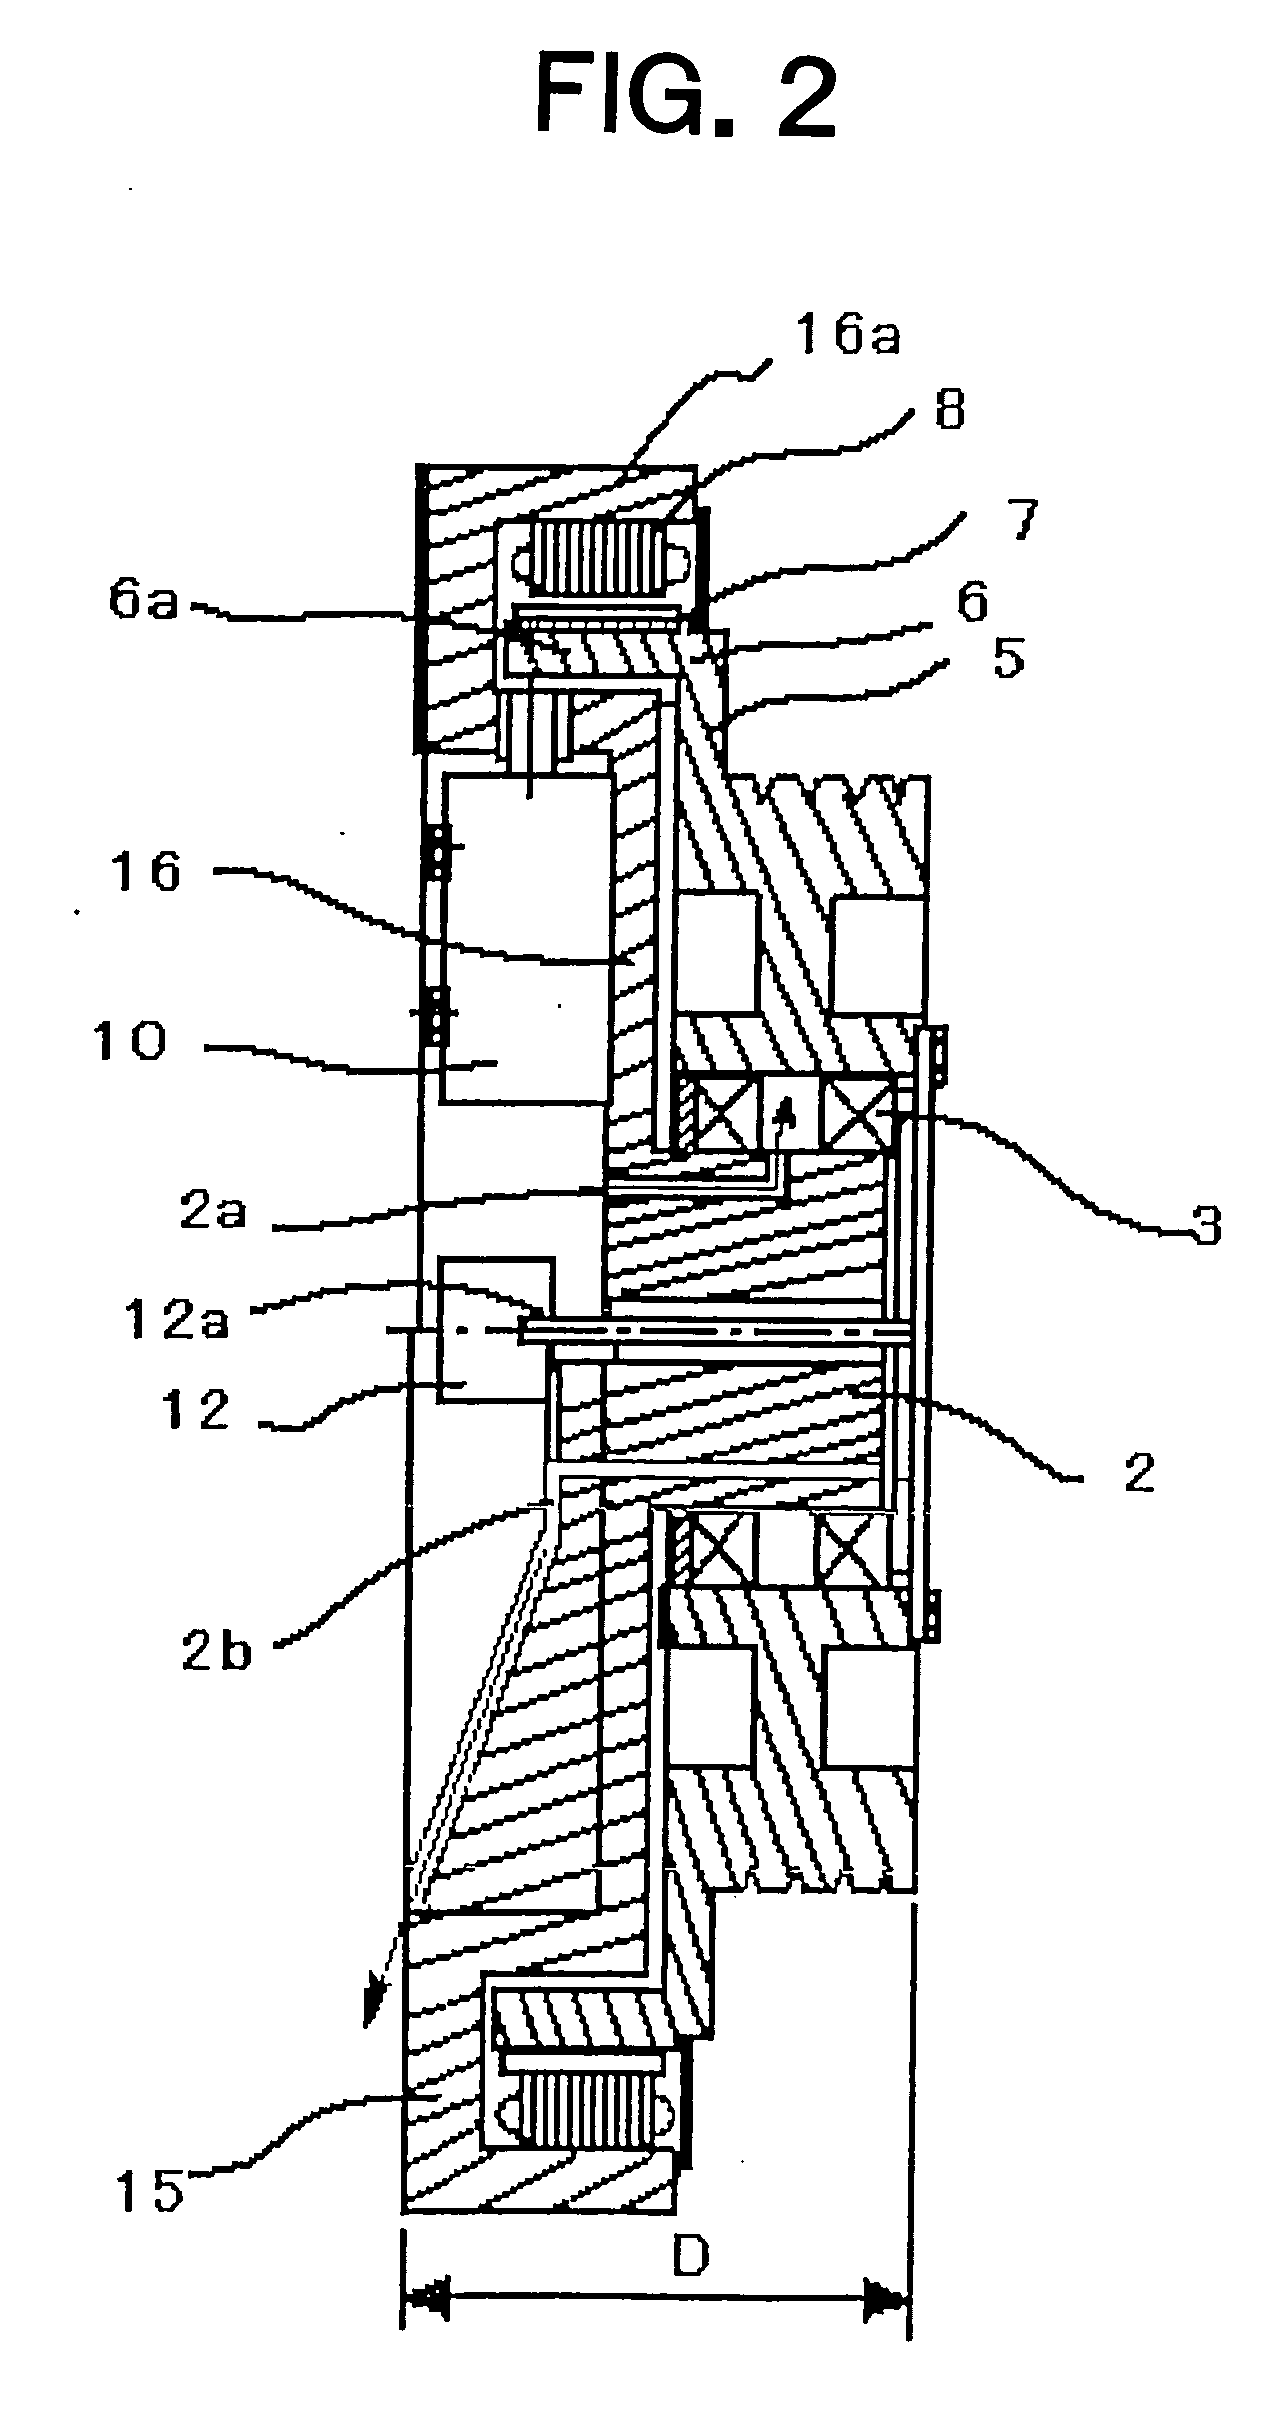 Host and motor for elevator